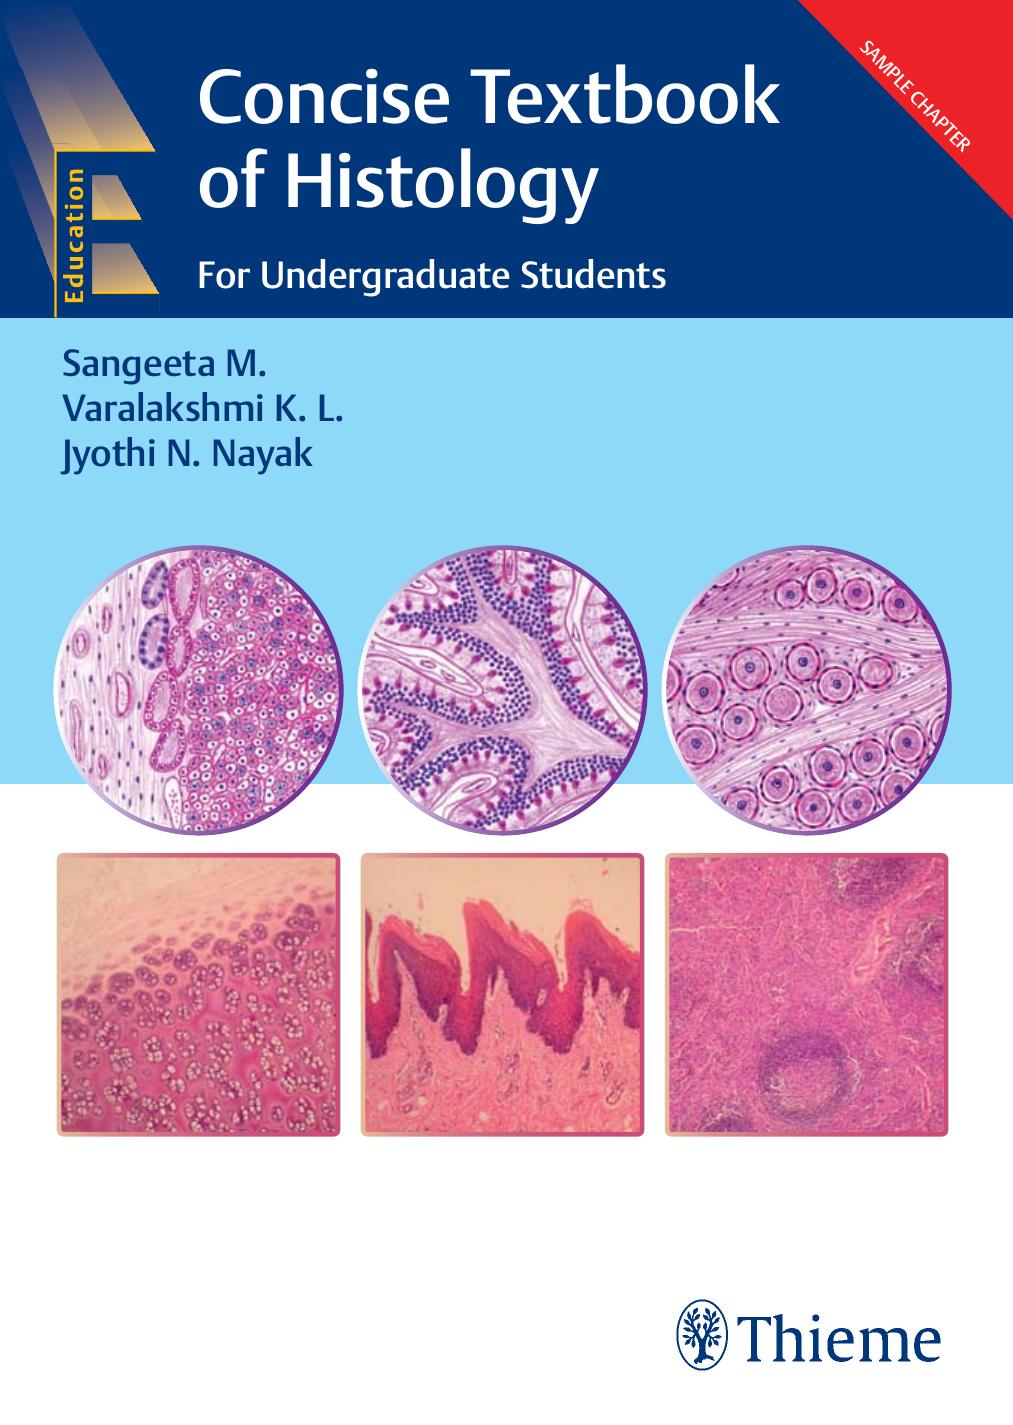 Concise Textbook of Histology blad 2018 g 3